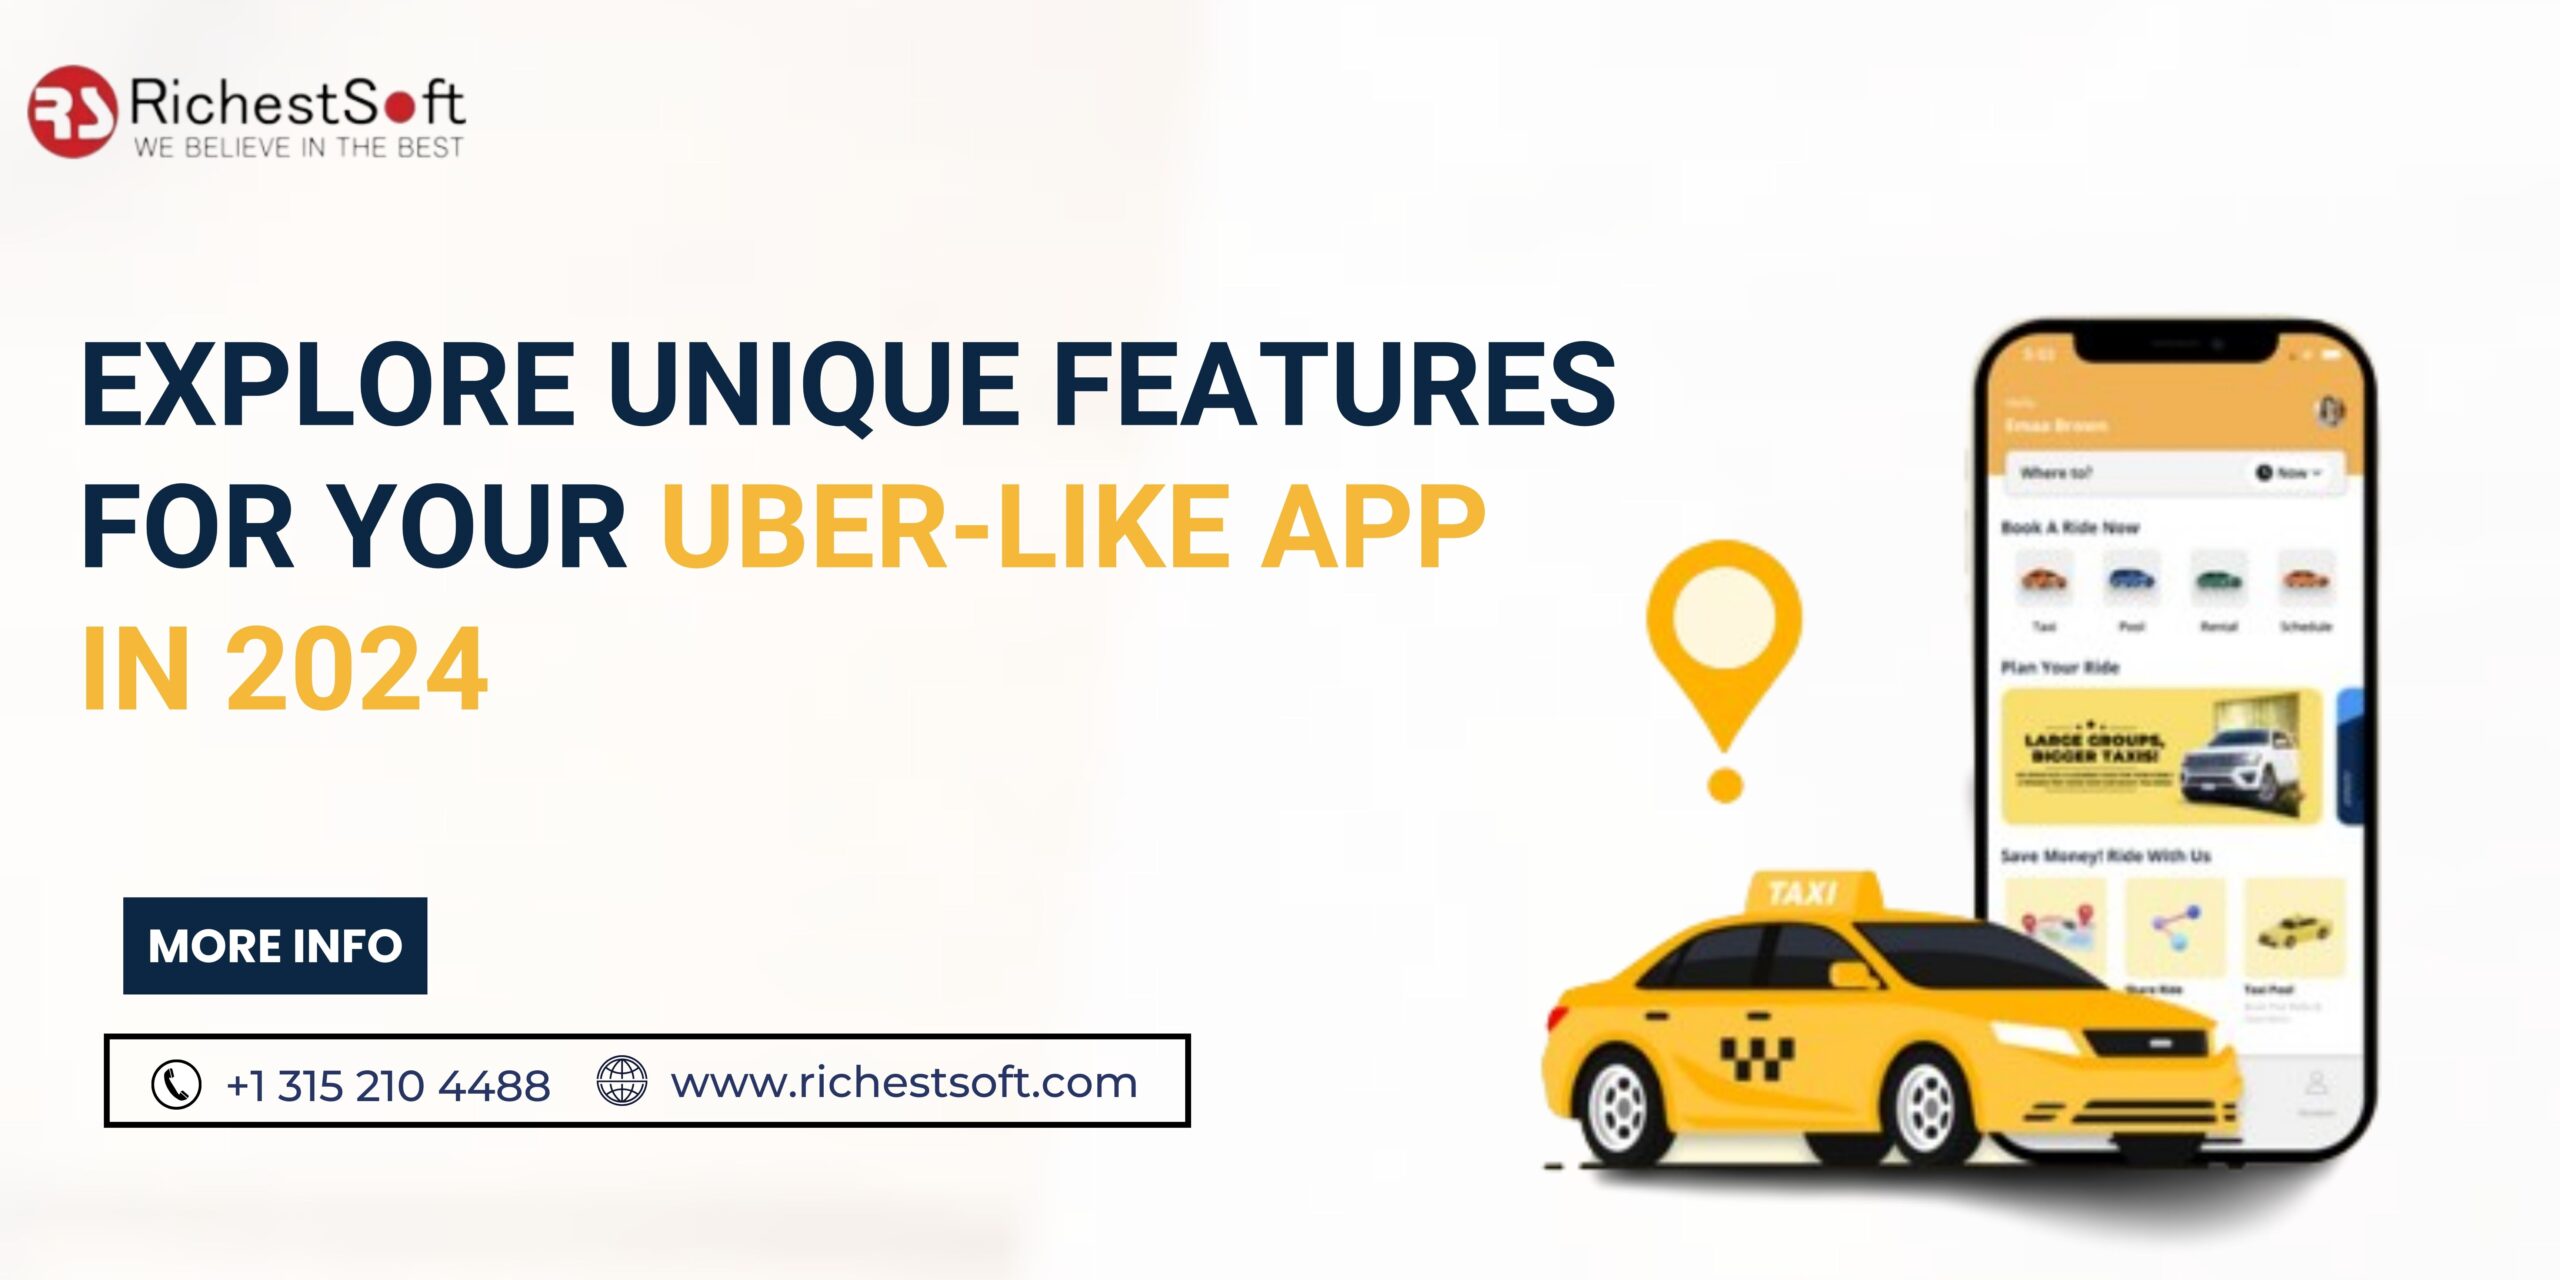 Explore Unique Features for Your Uber-Like App in 2024